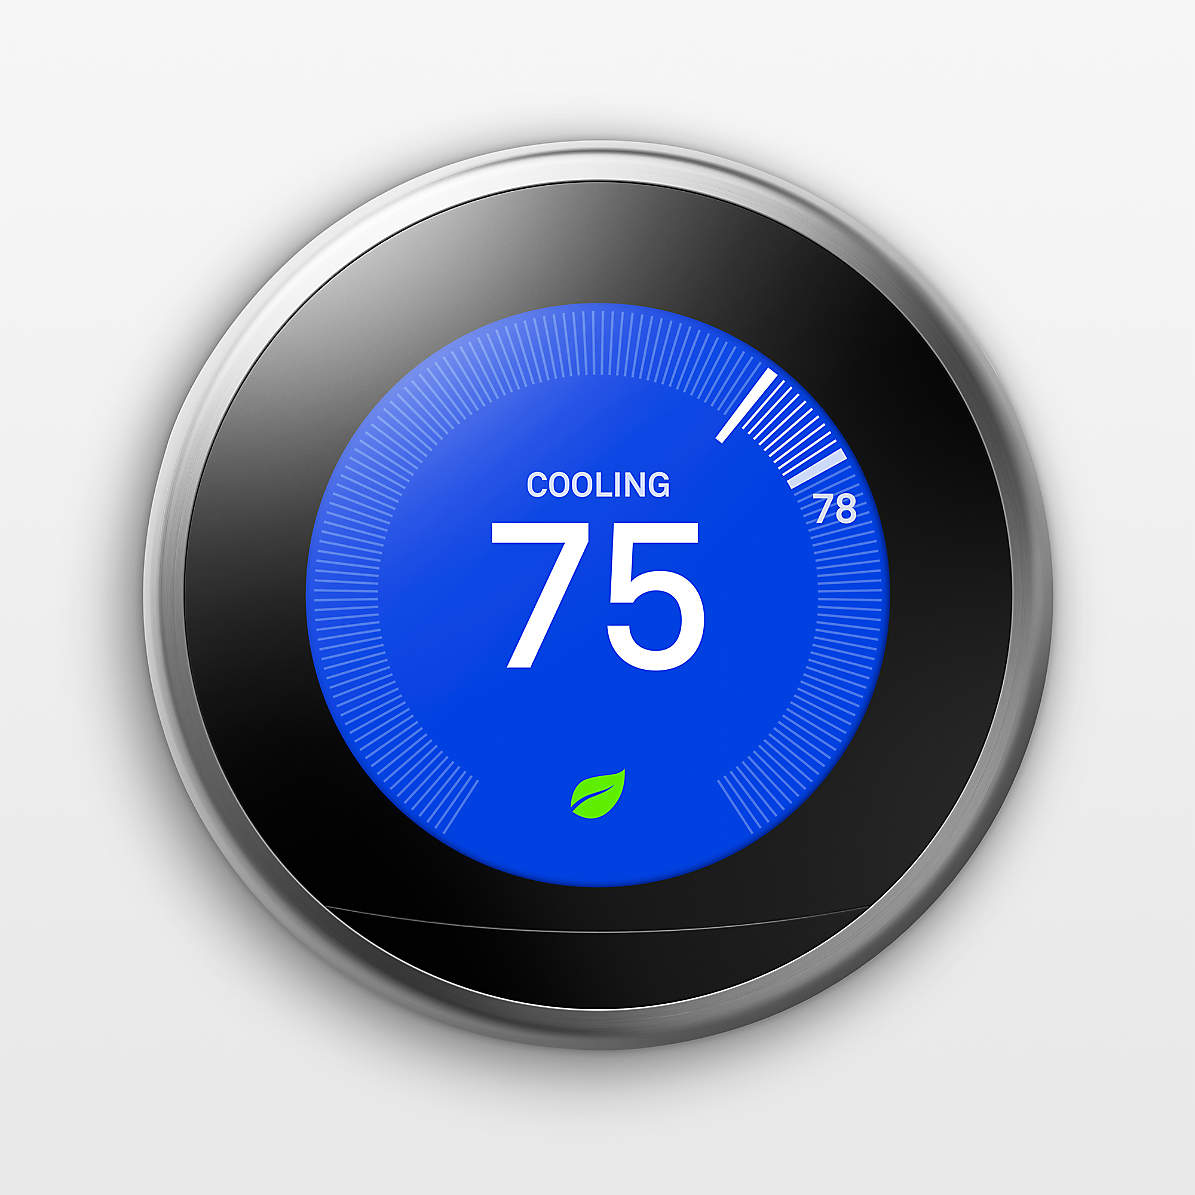 Google Nest Silver Thermostat + Reviews | Crate & Barrel